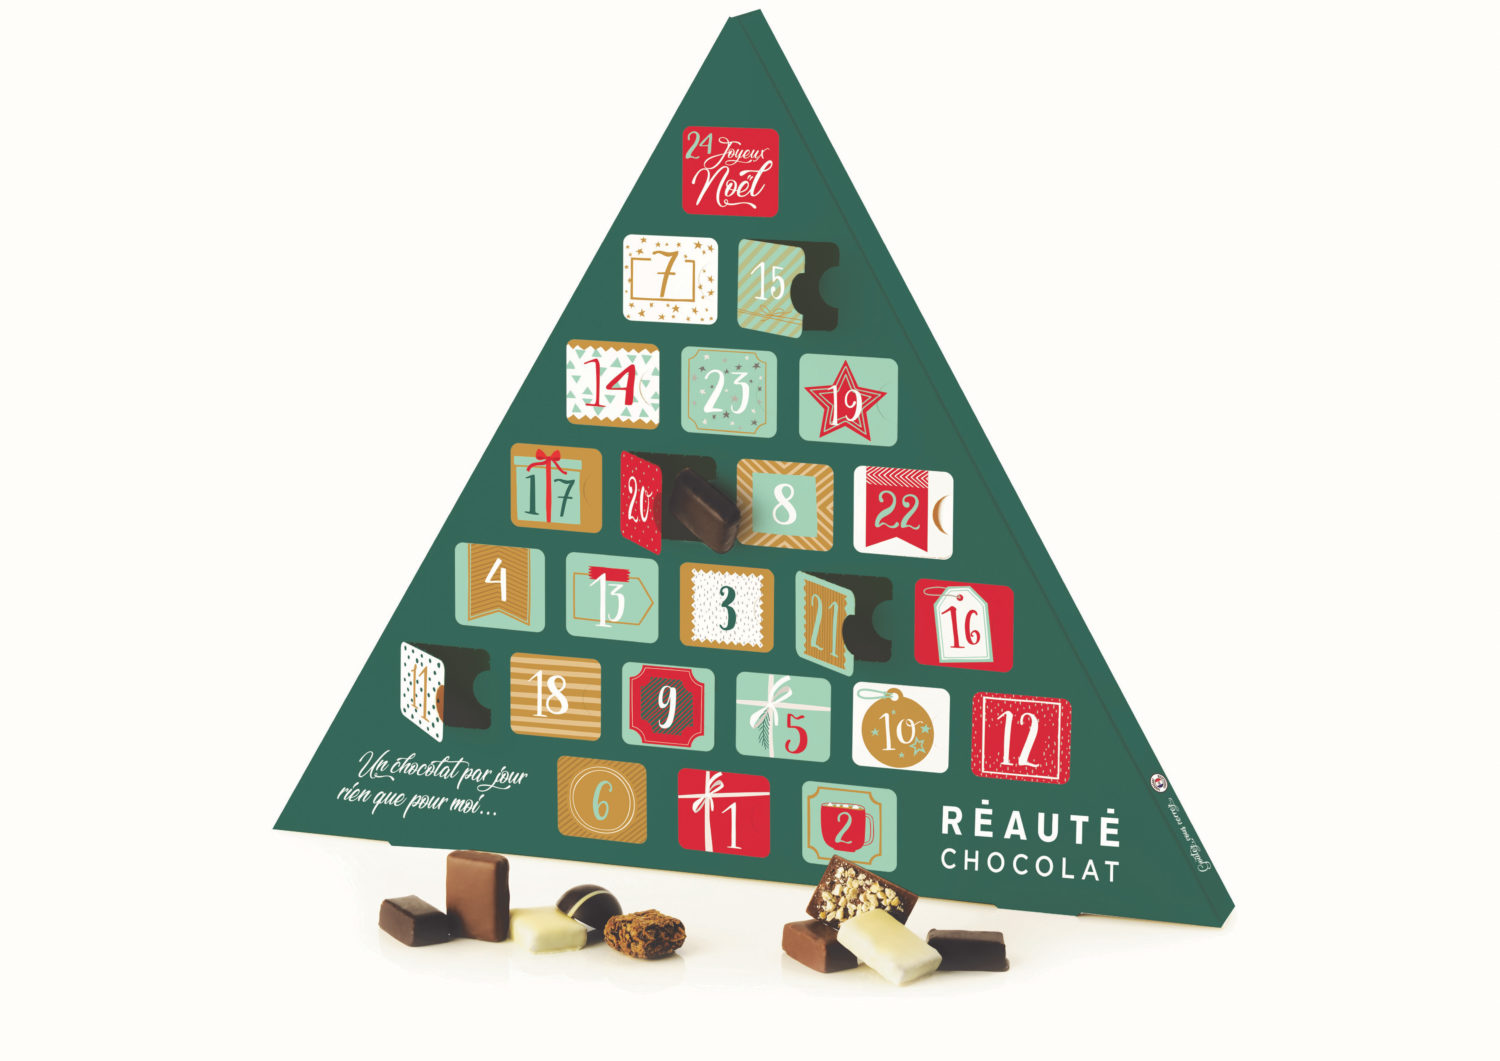 Reaute  chocolat calendrier avent soloedited-jpg